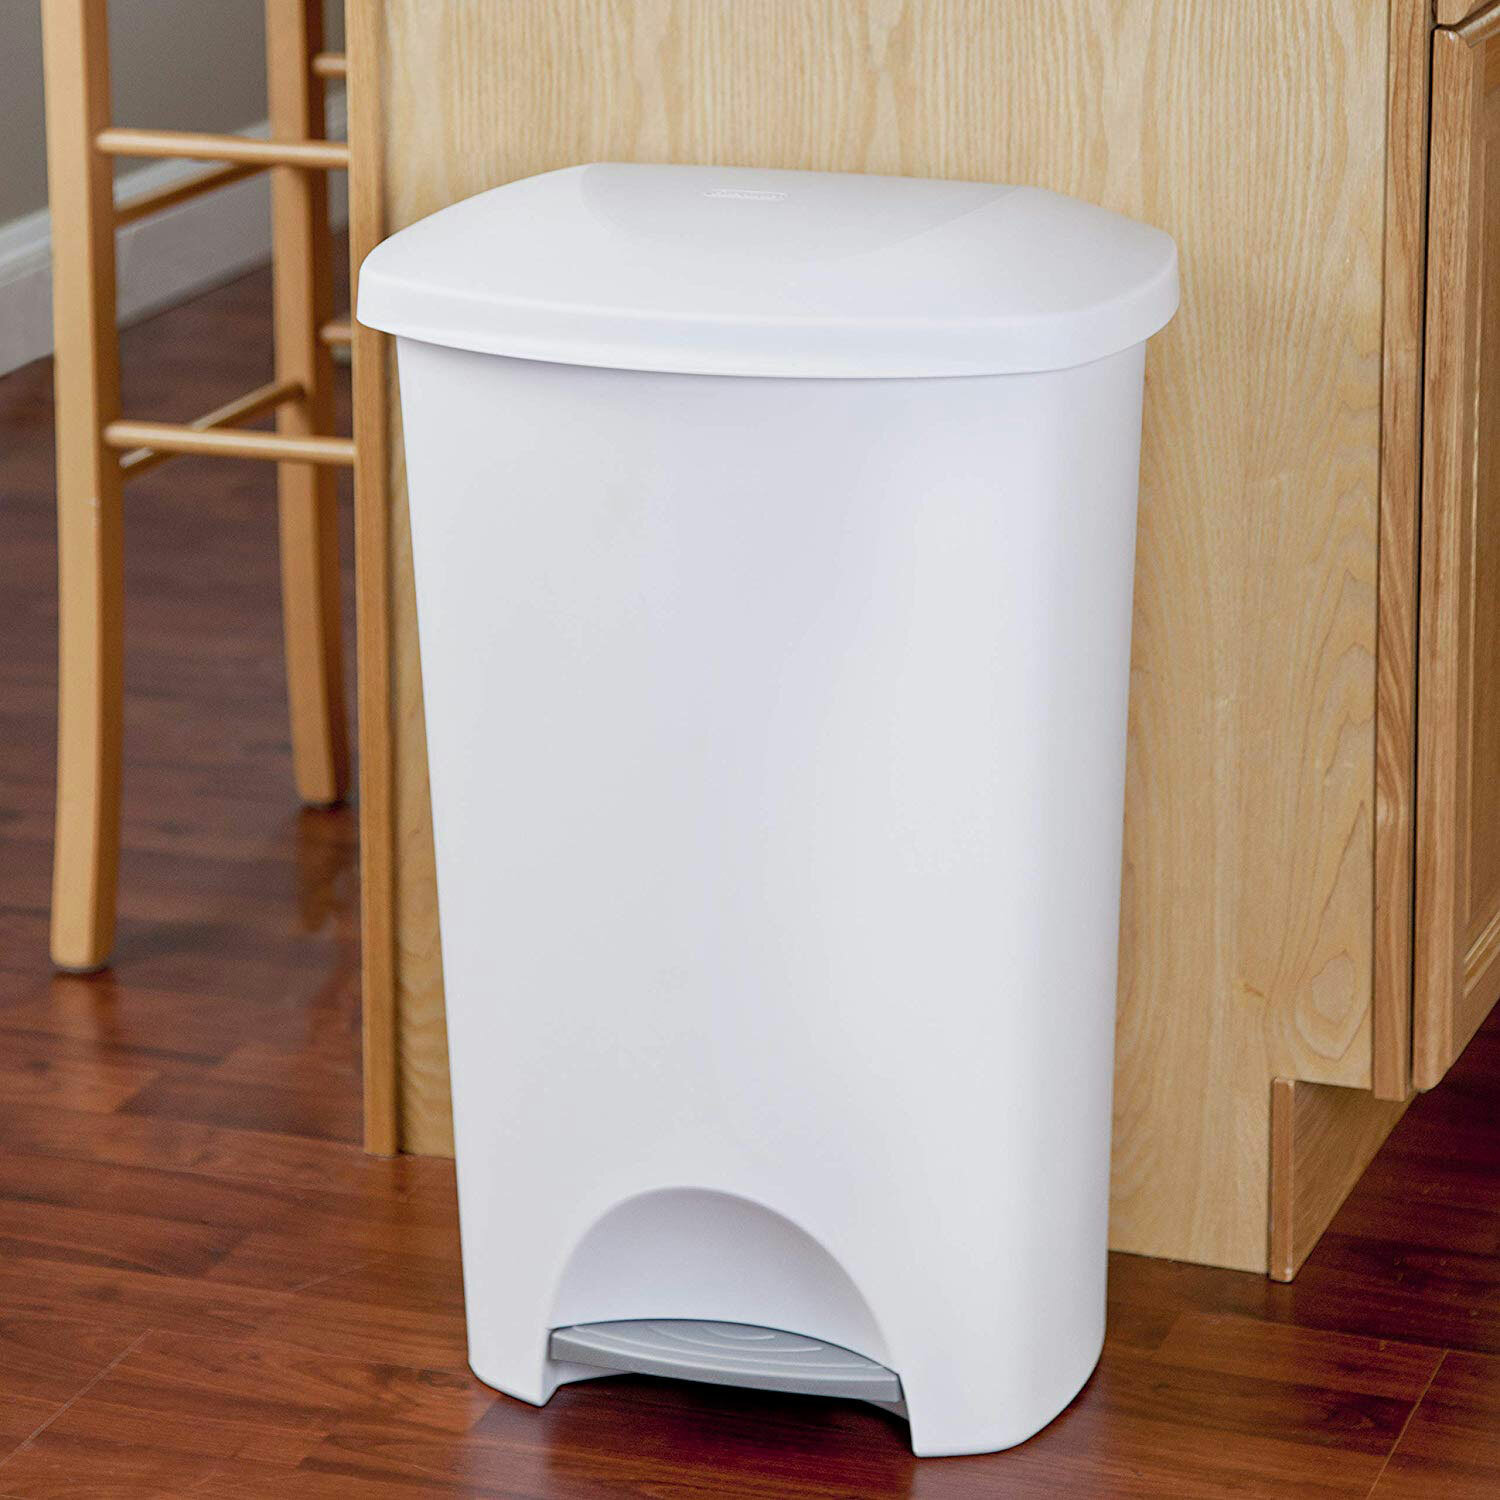 Details about   Step On Lid Trash Can Kitchen Laundry Room Garbage 11 Gallon Capacity Pedal 